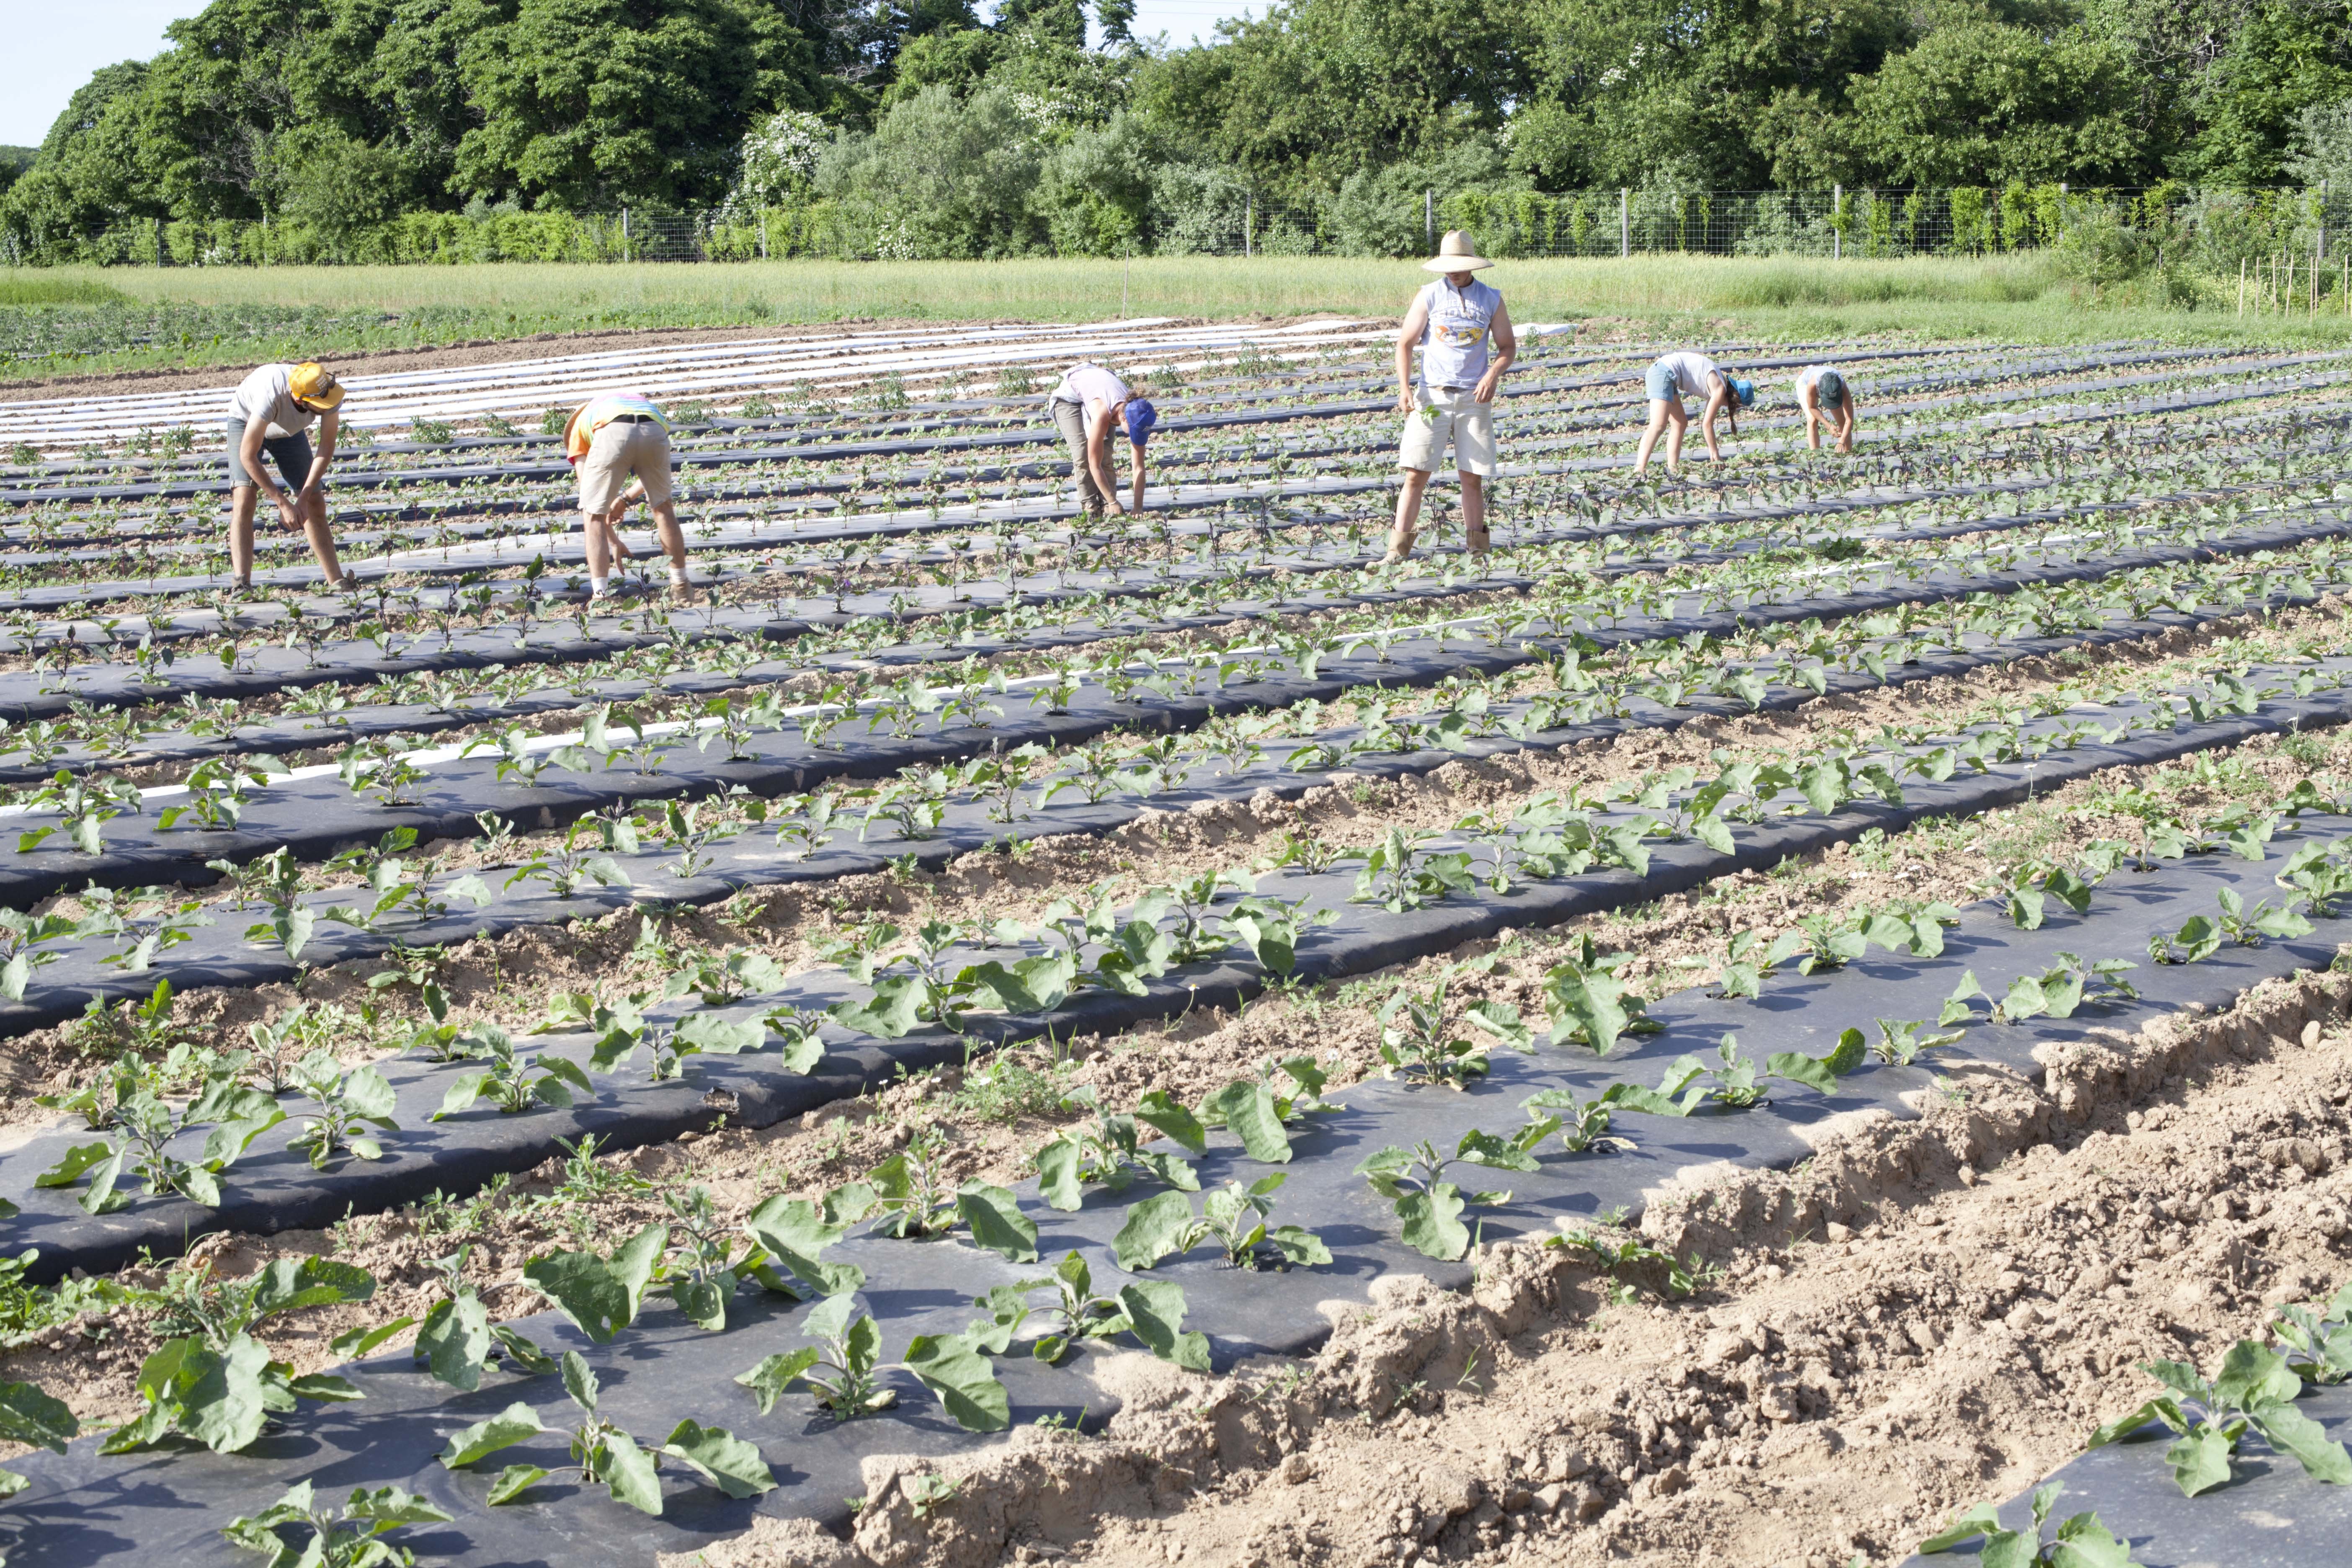 people planting new crops at Amber Waves Farm